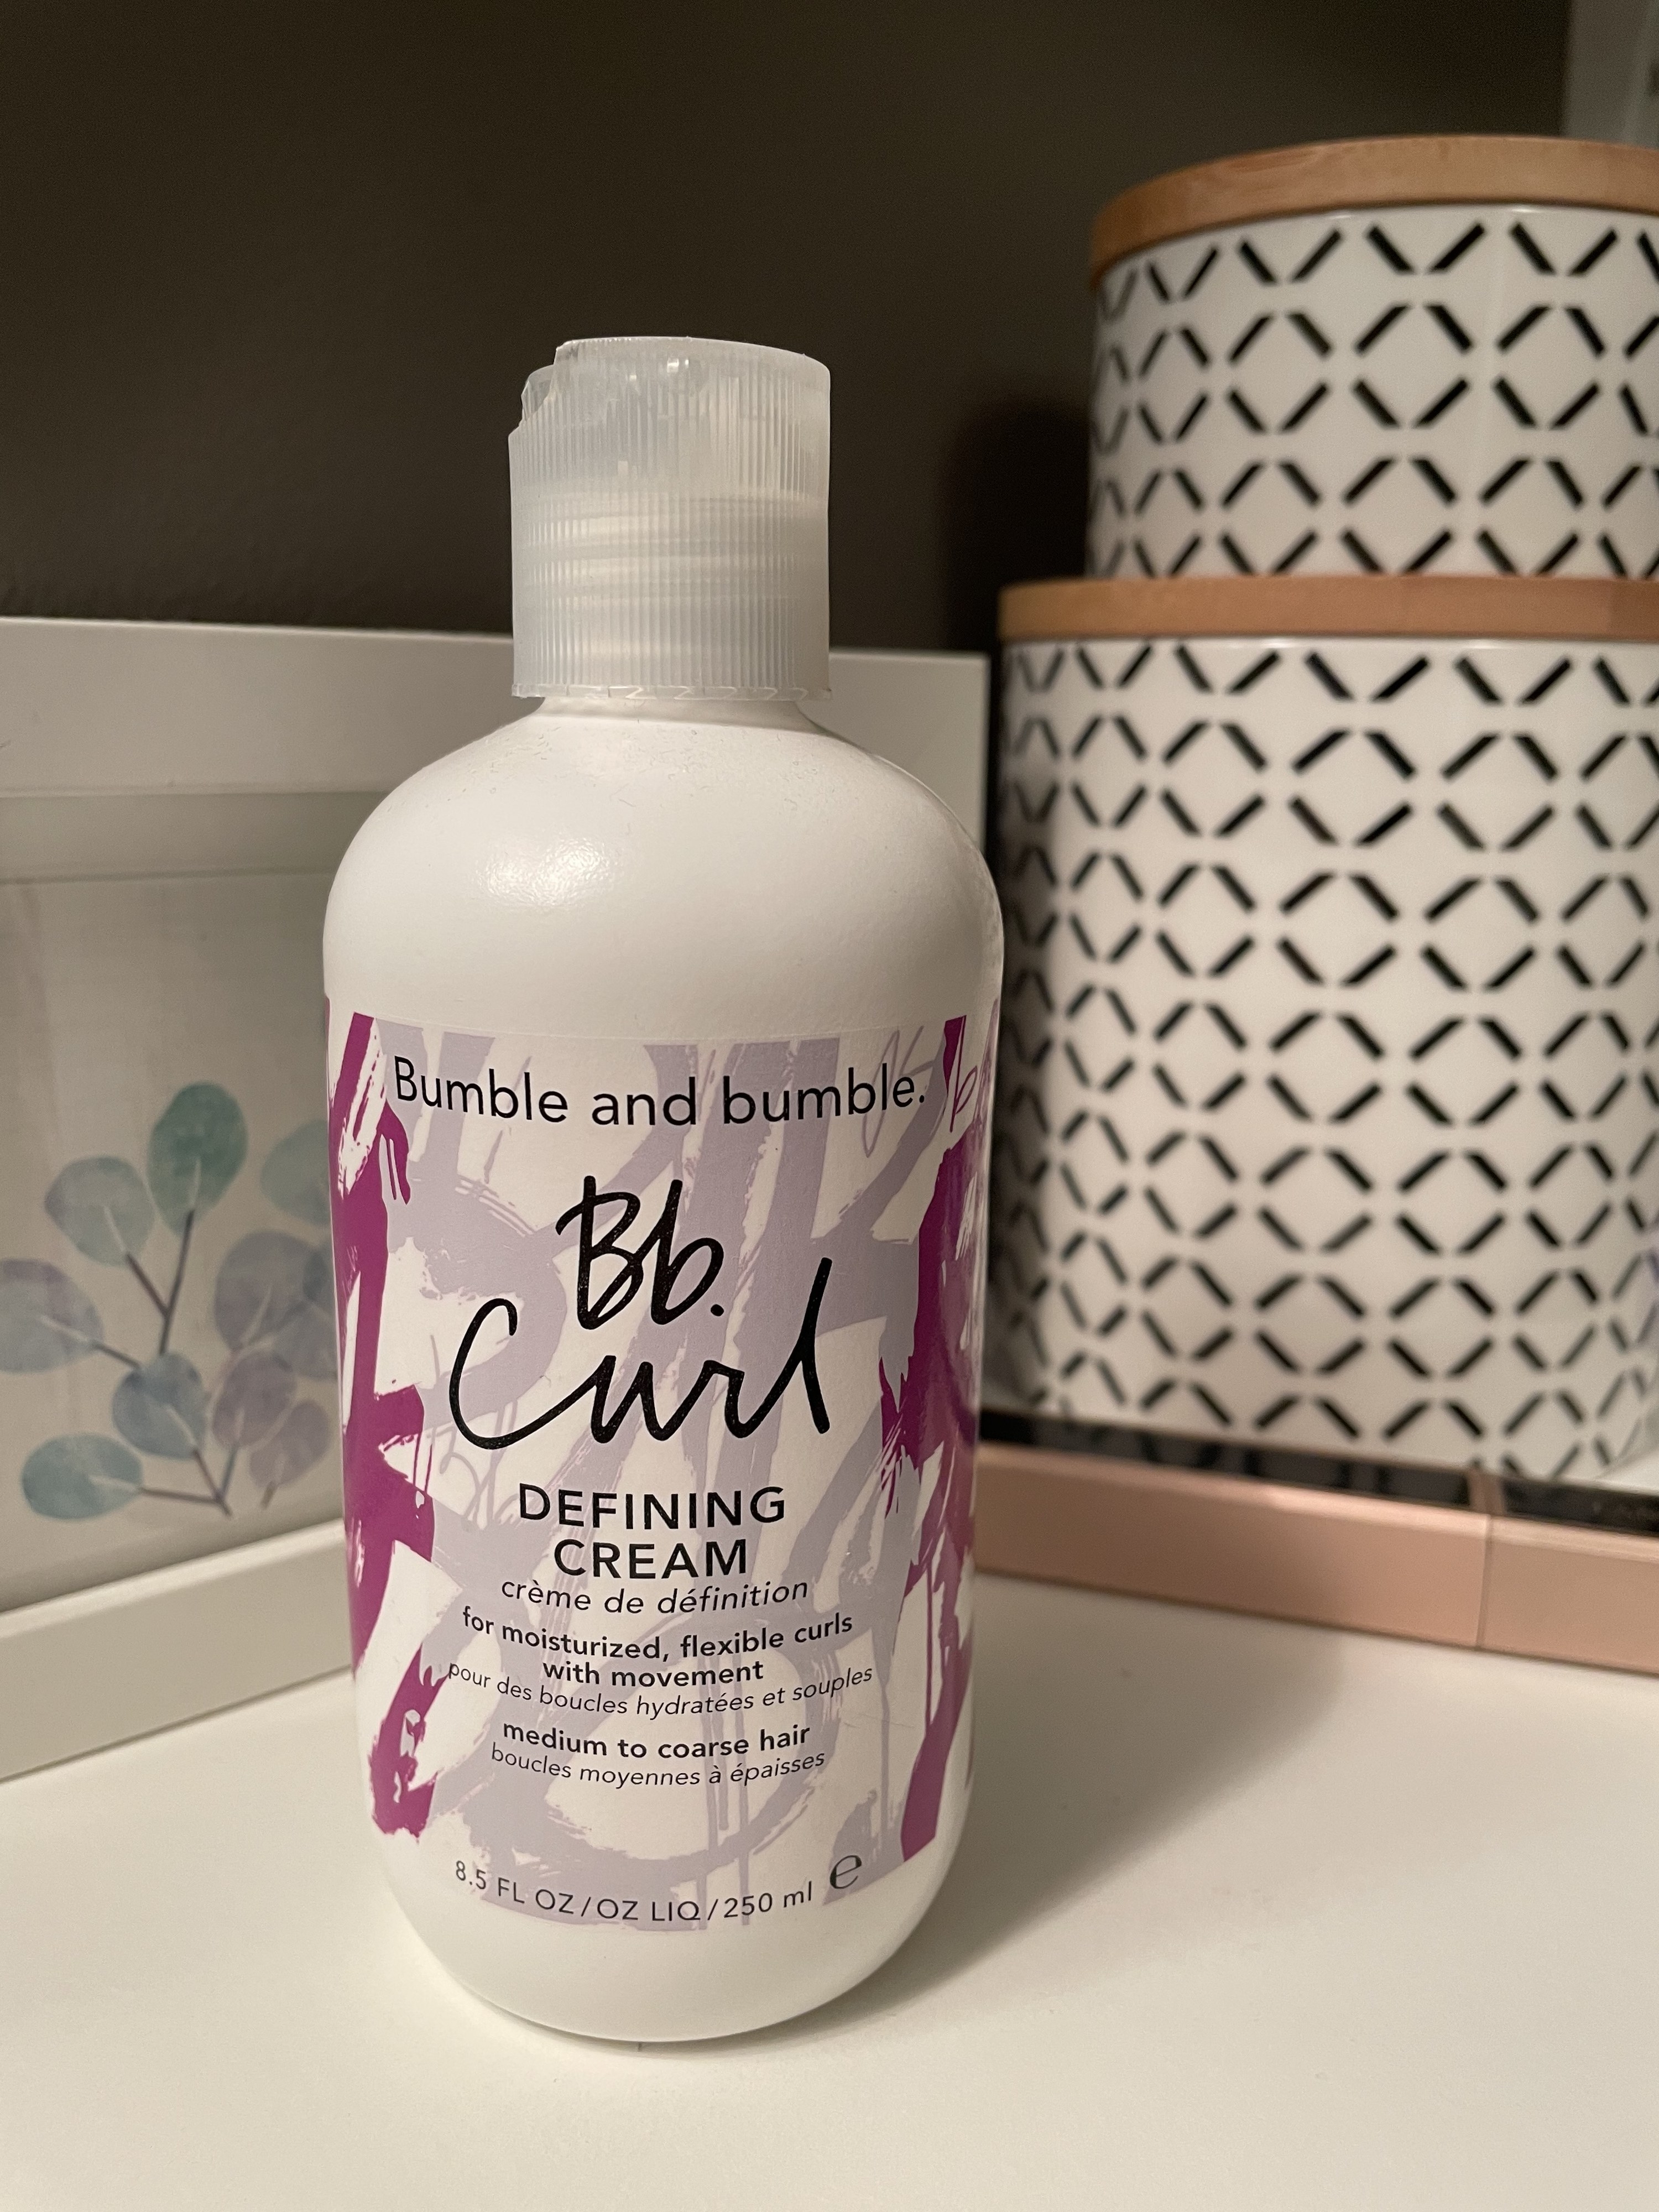 The bottle of BB curl defining cream 